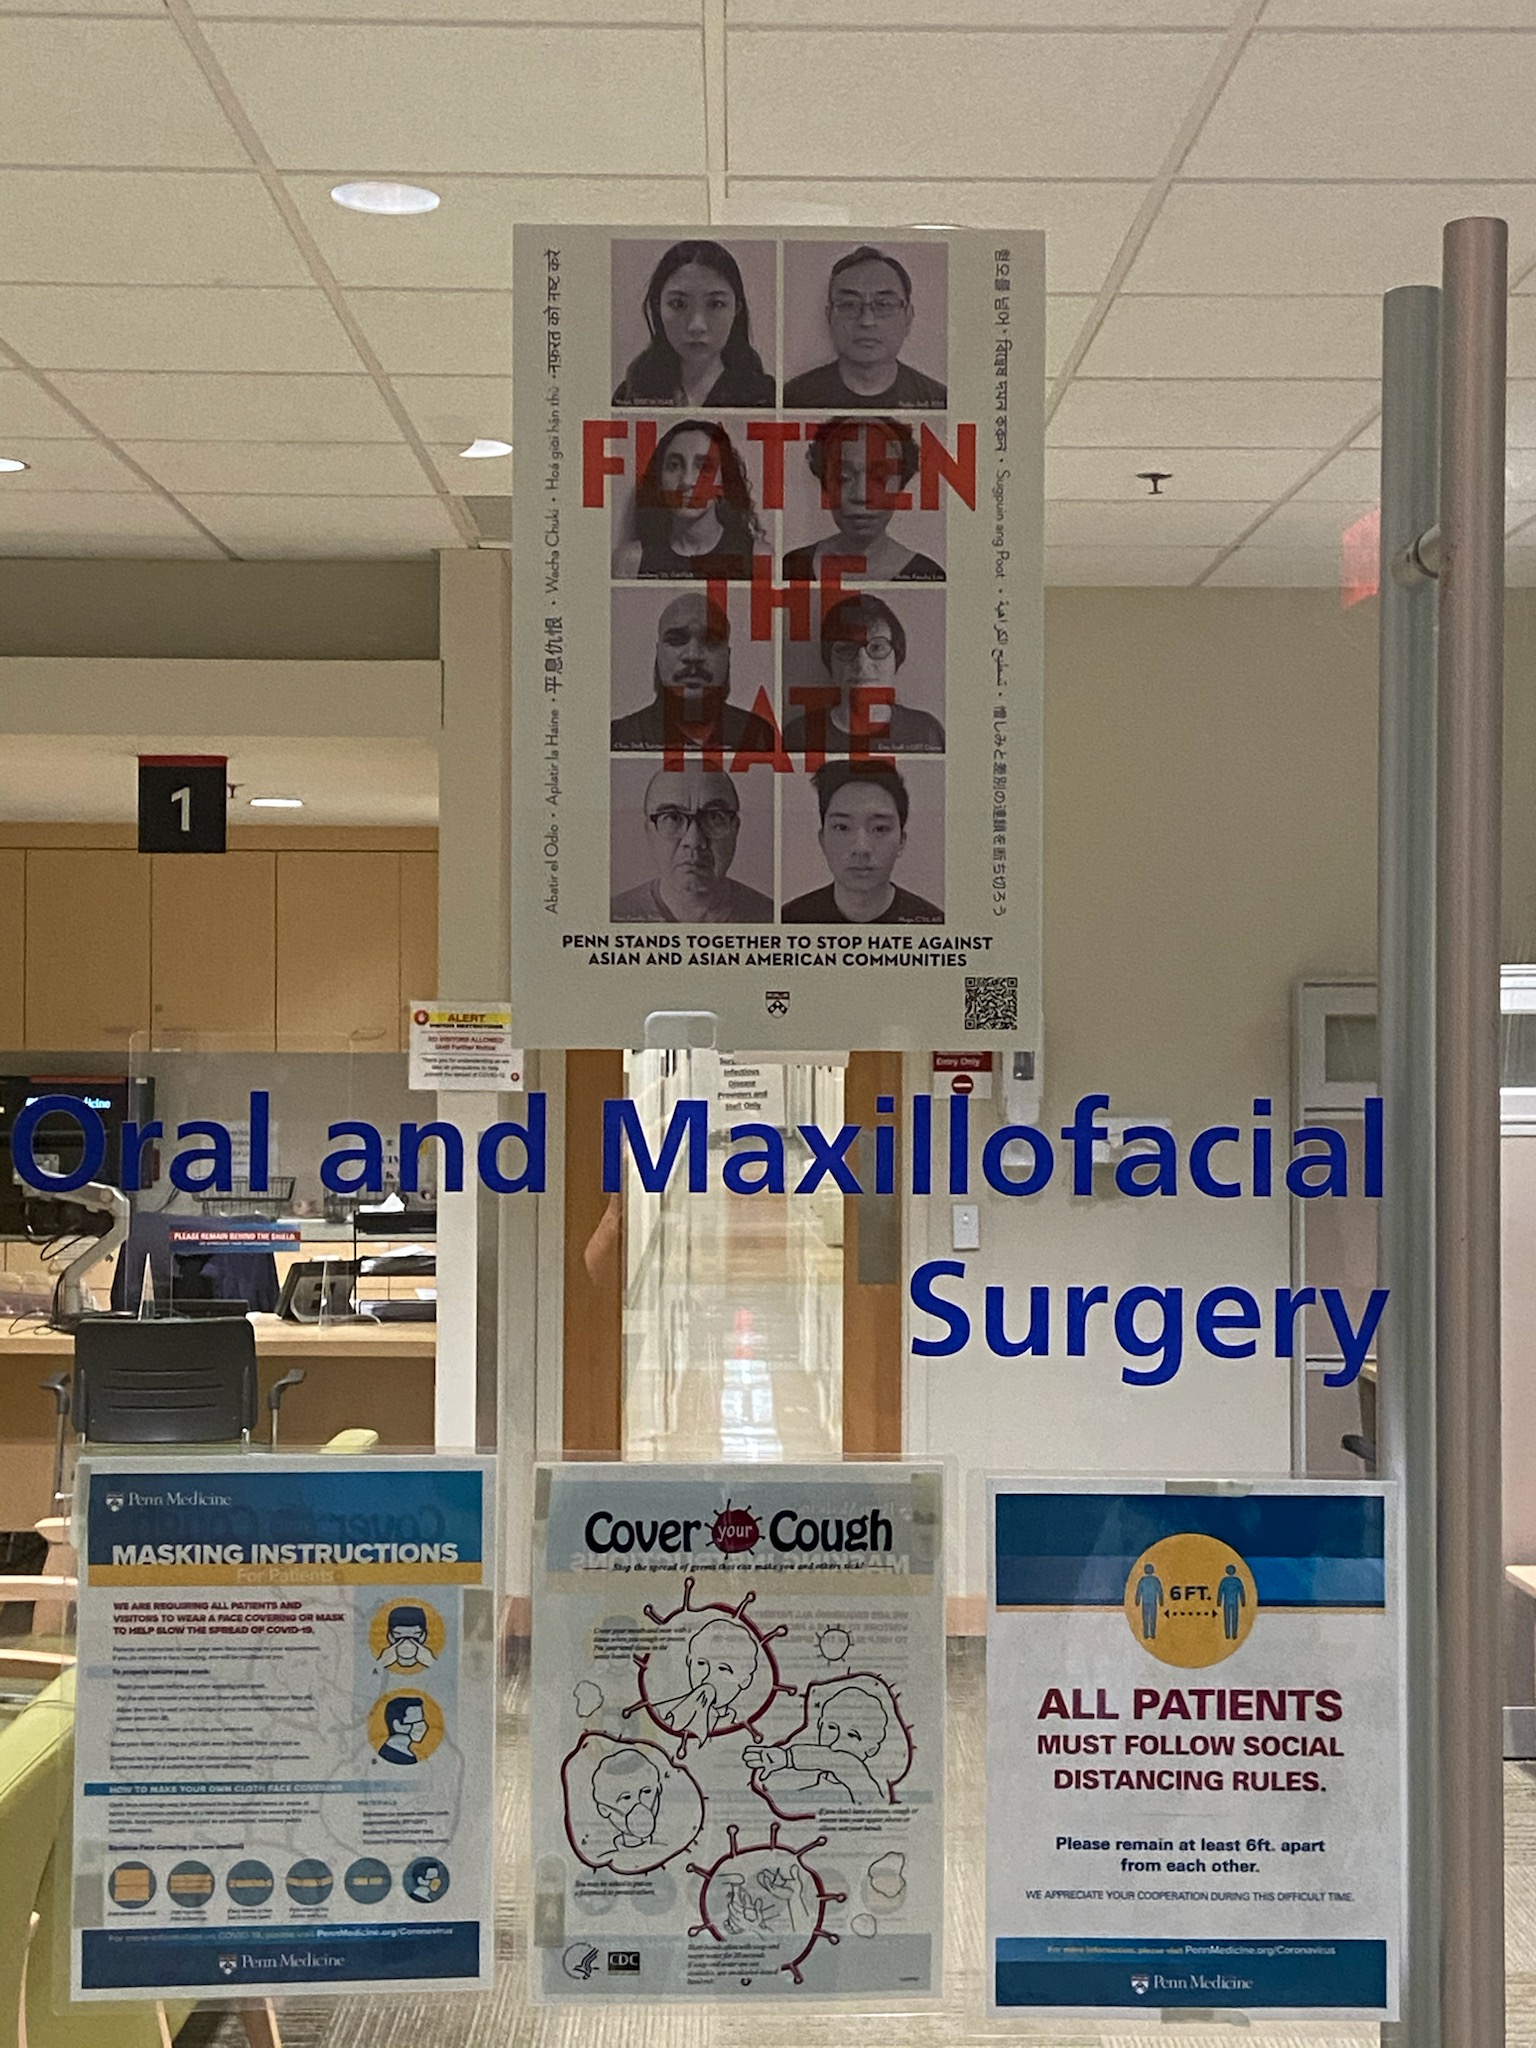 Glass window with "flatten the hate" poster and a sign that says "Oral and Maxillofacial Surgery"